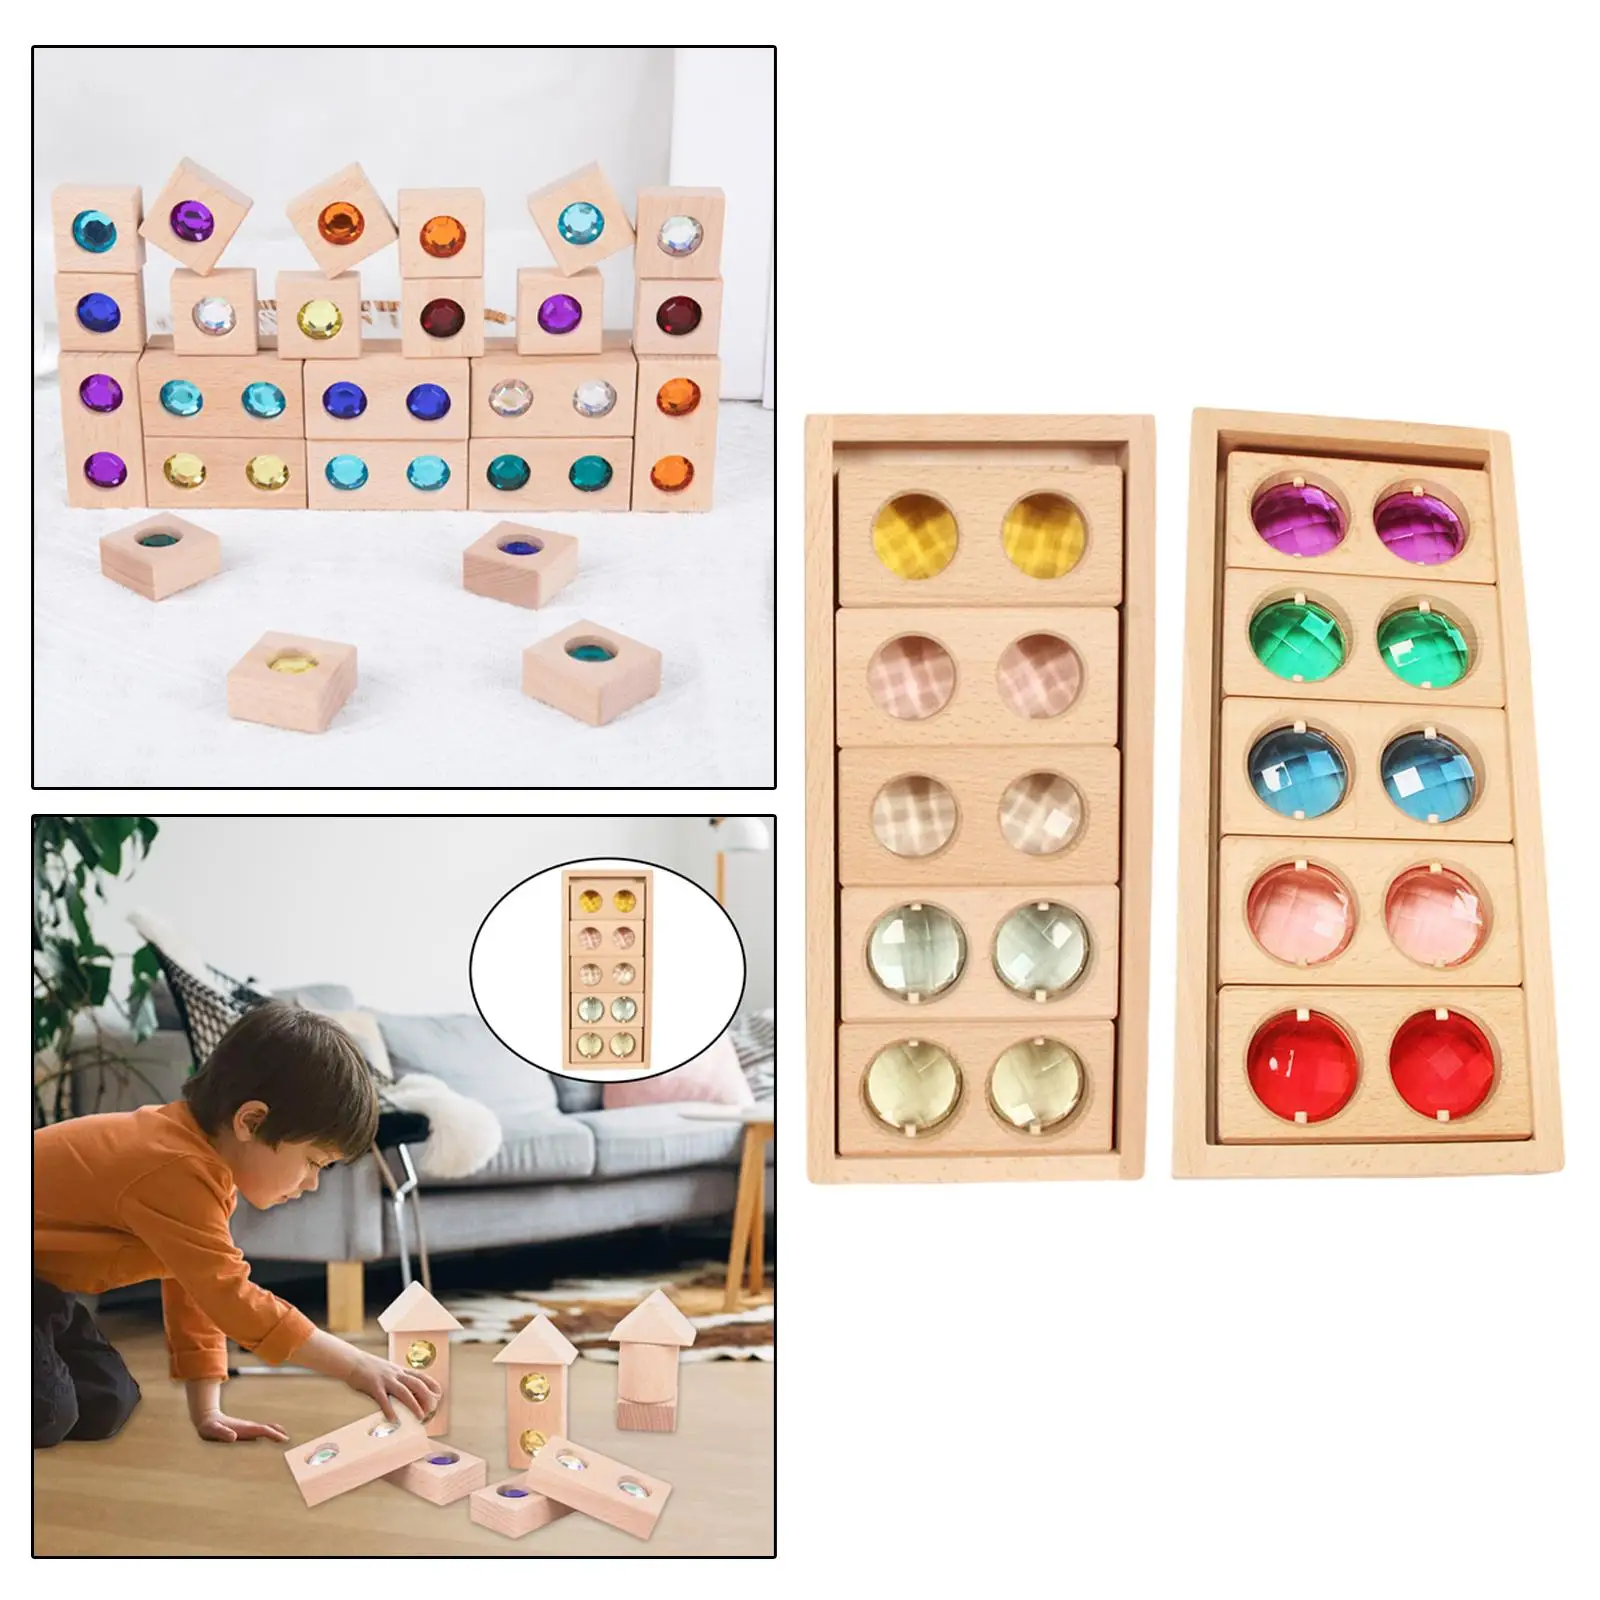 Wooden Toy Educational  Fillers Geometric Rainbow Gemstone Blocks for Outdoor Preschool Developing Color Perception Toddlers